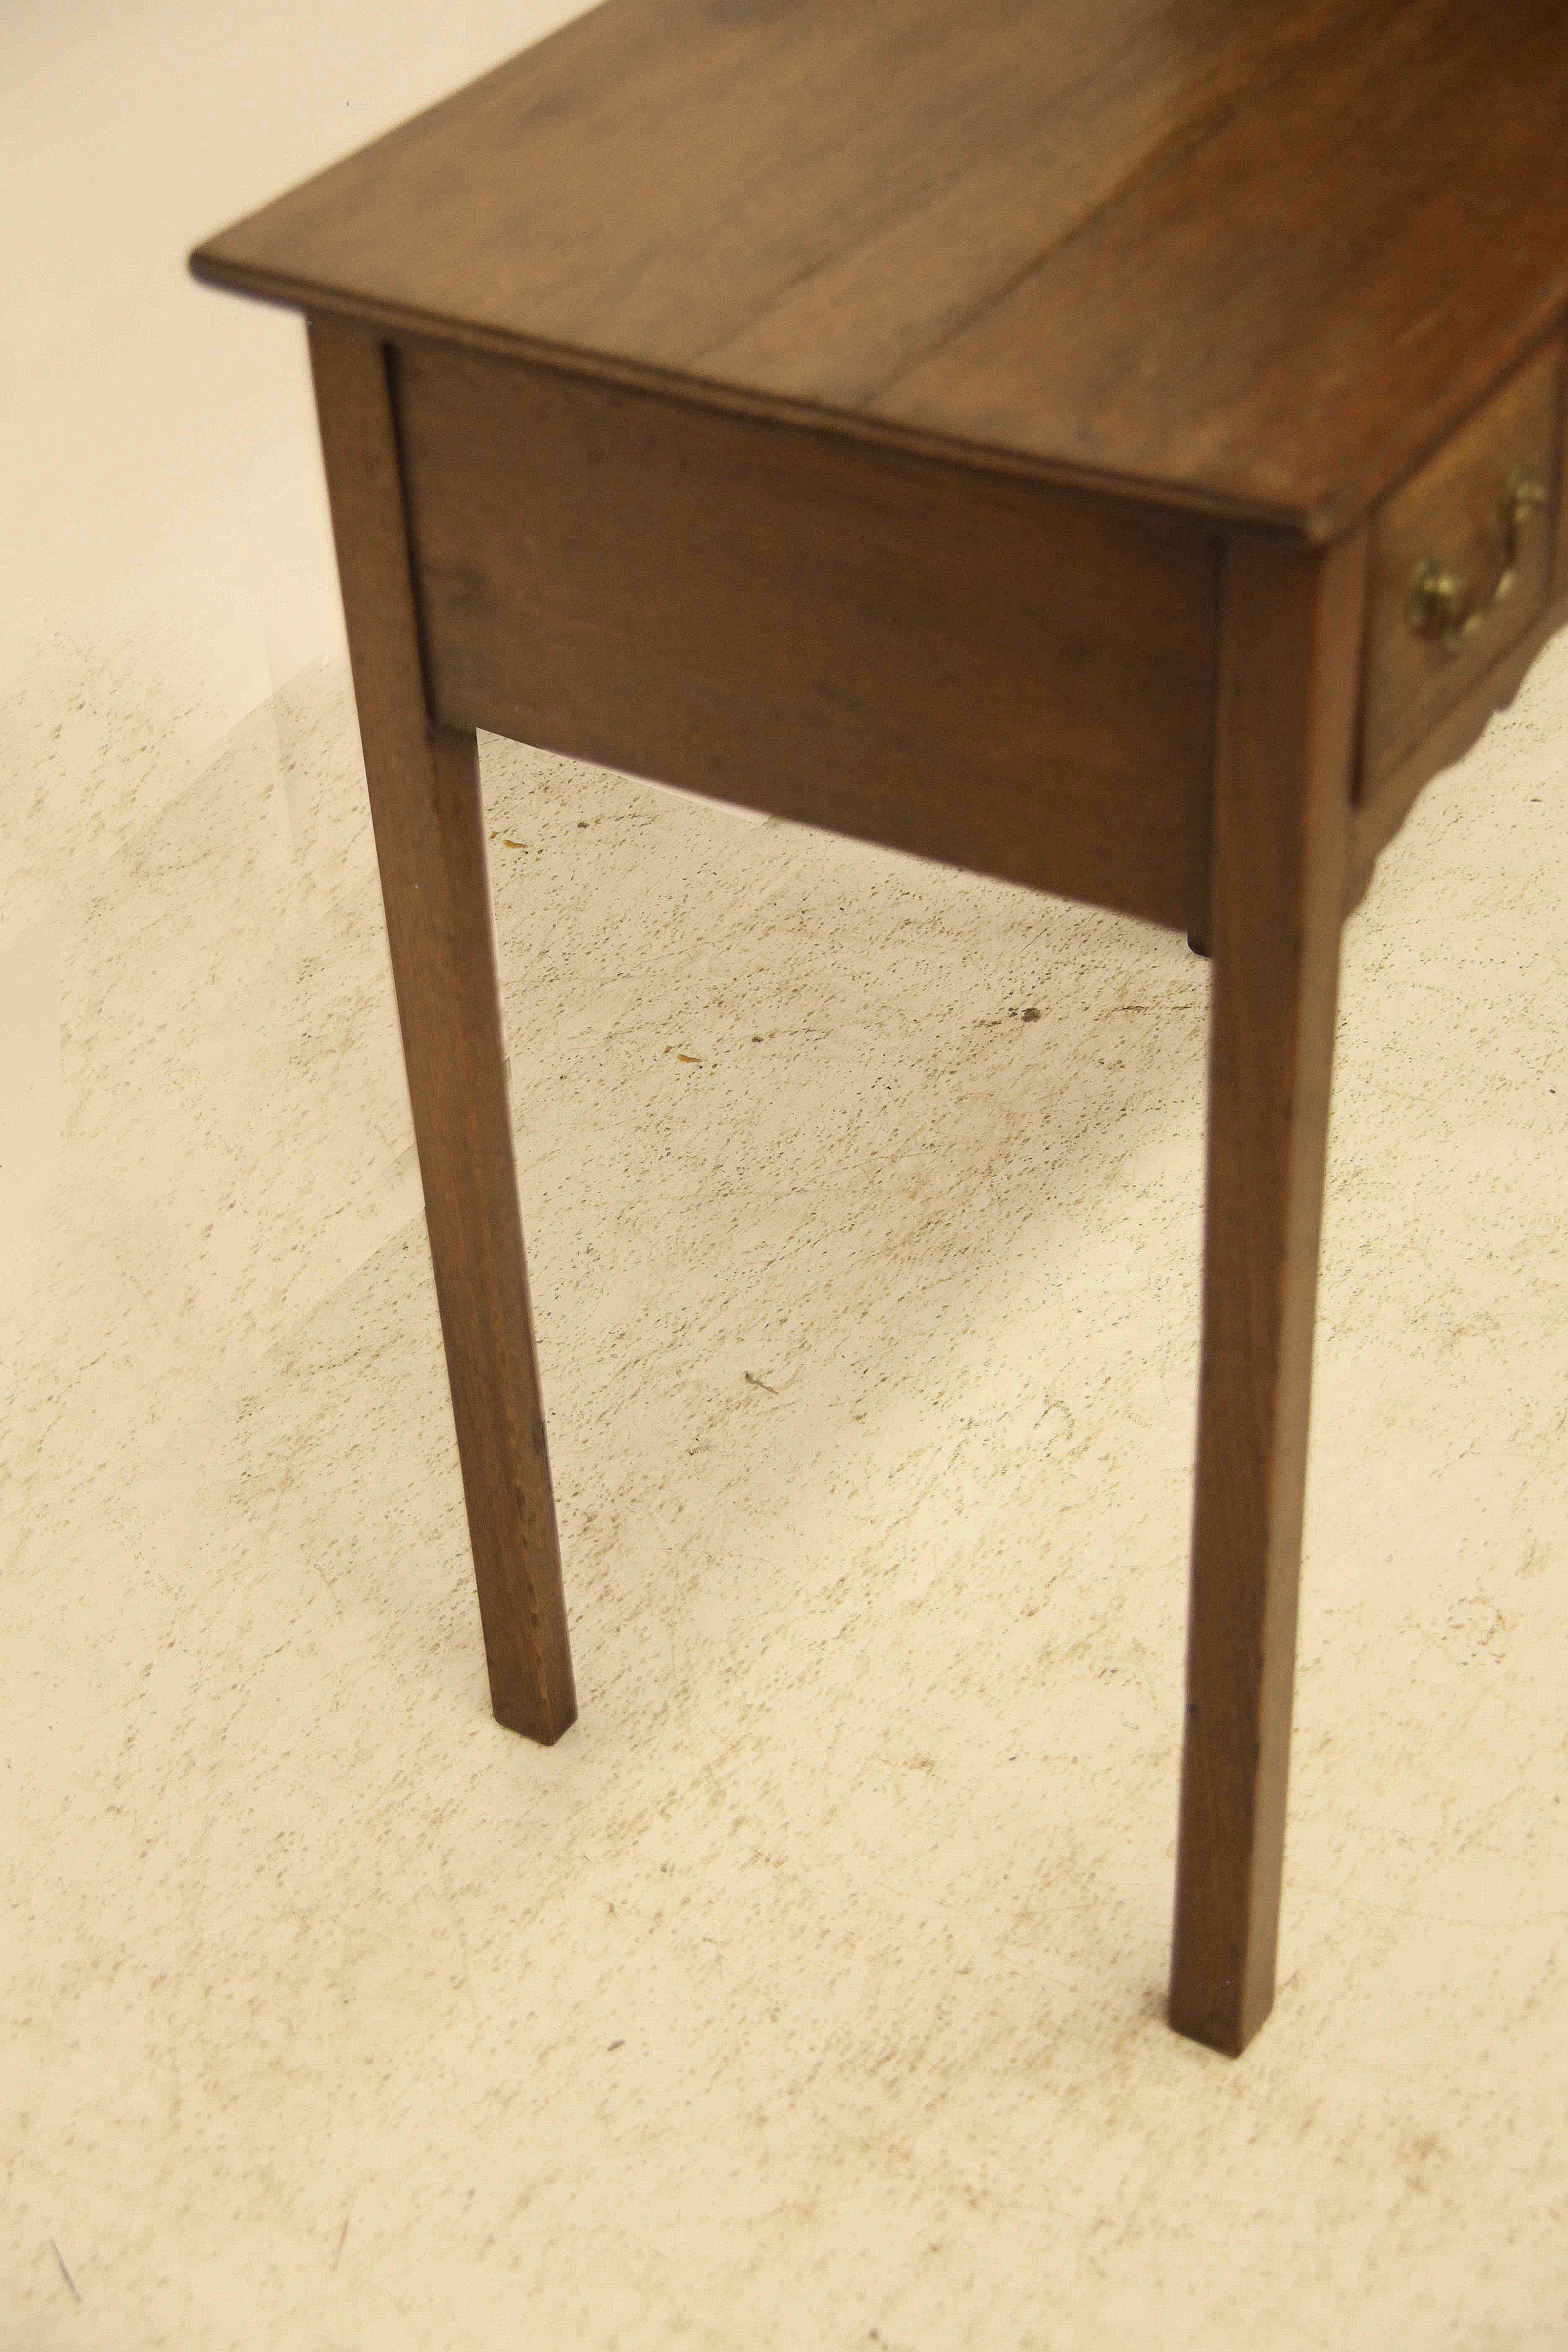 English oak three drawer side table, the top with molded edge above three drawers cross banded with mahogany, original swan neck brass pulls, nicely shaped apron and slender tapered legs.